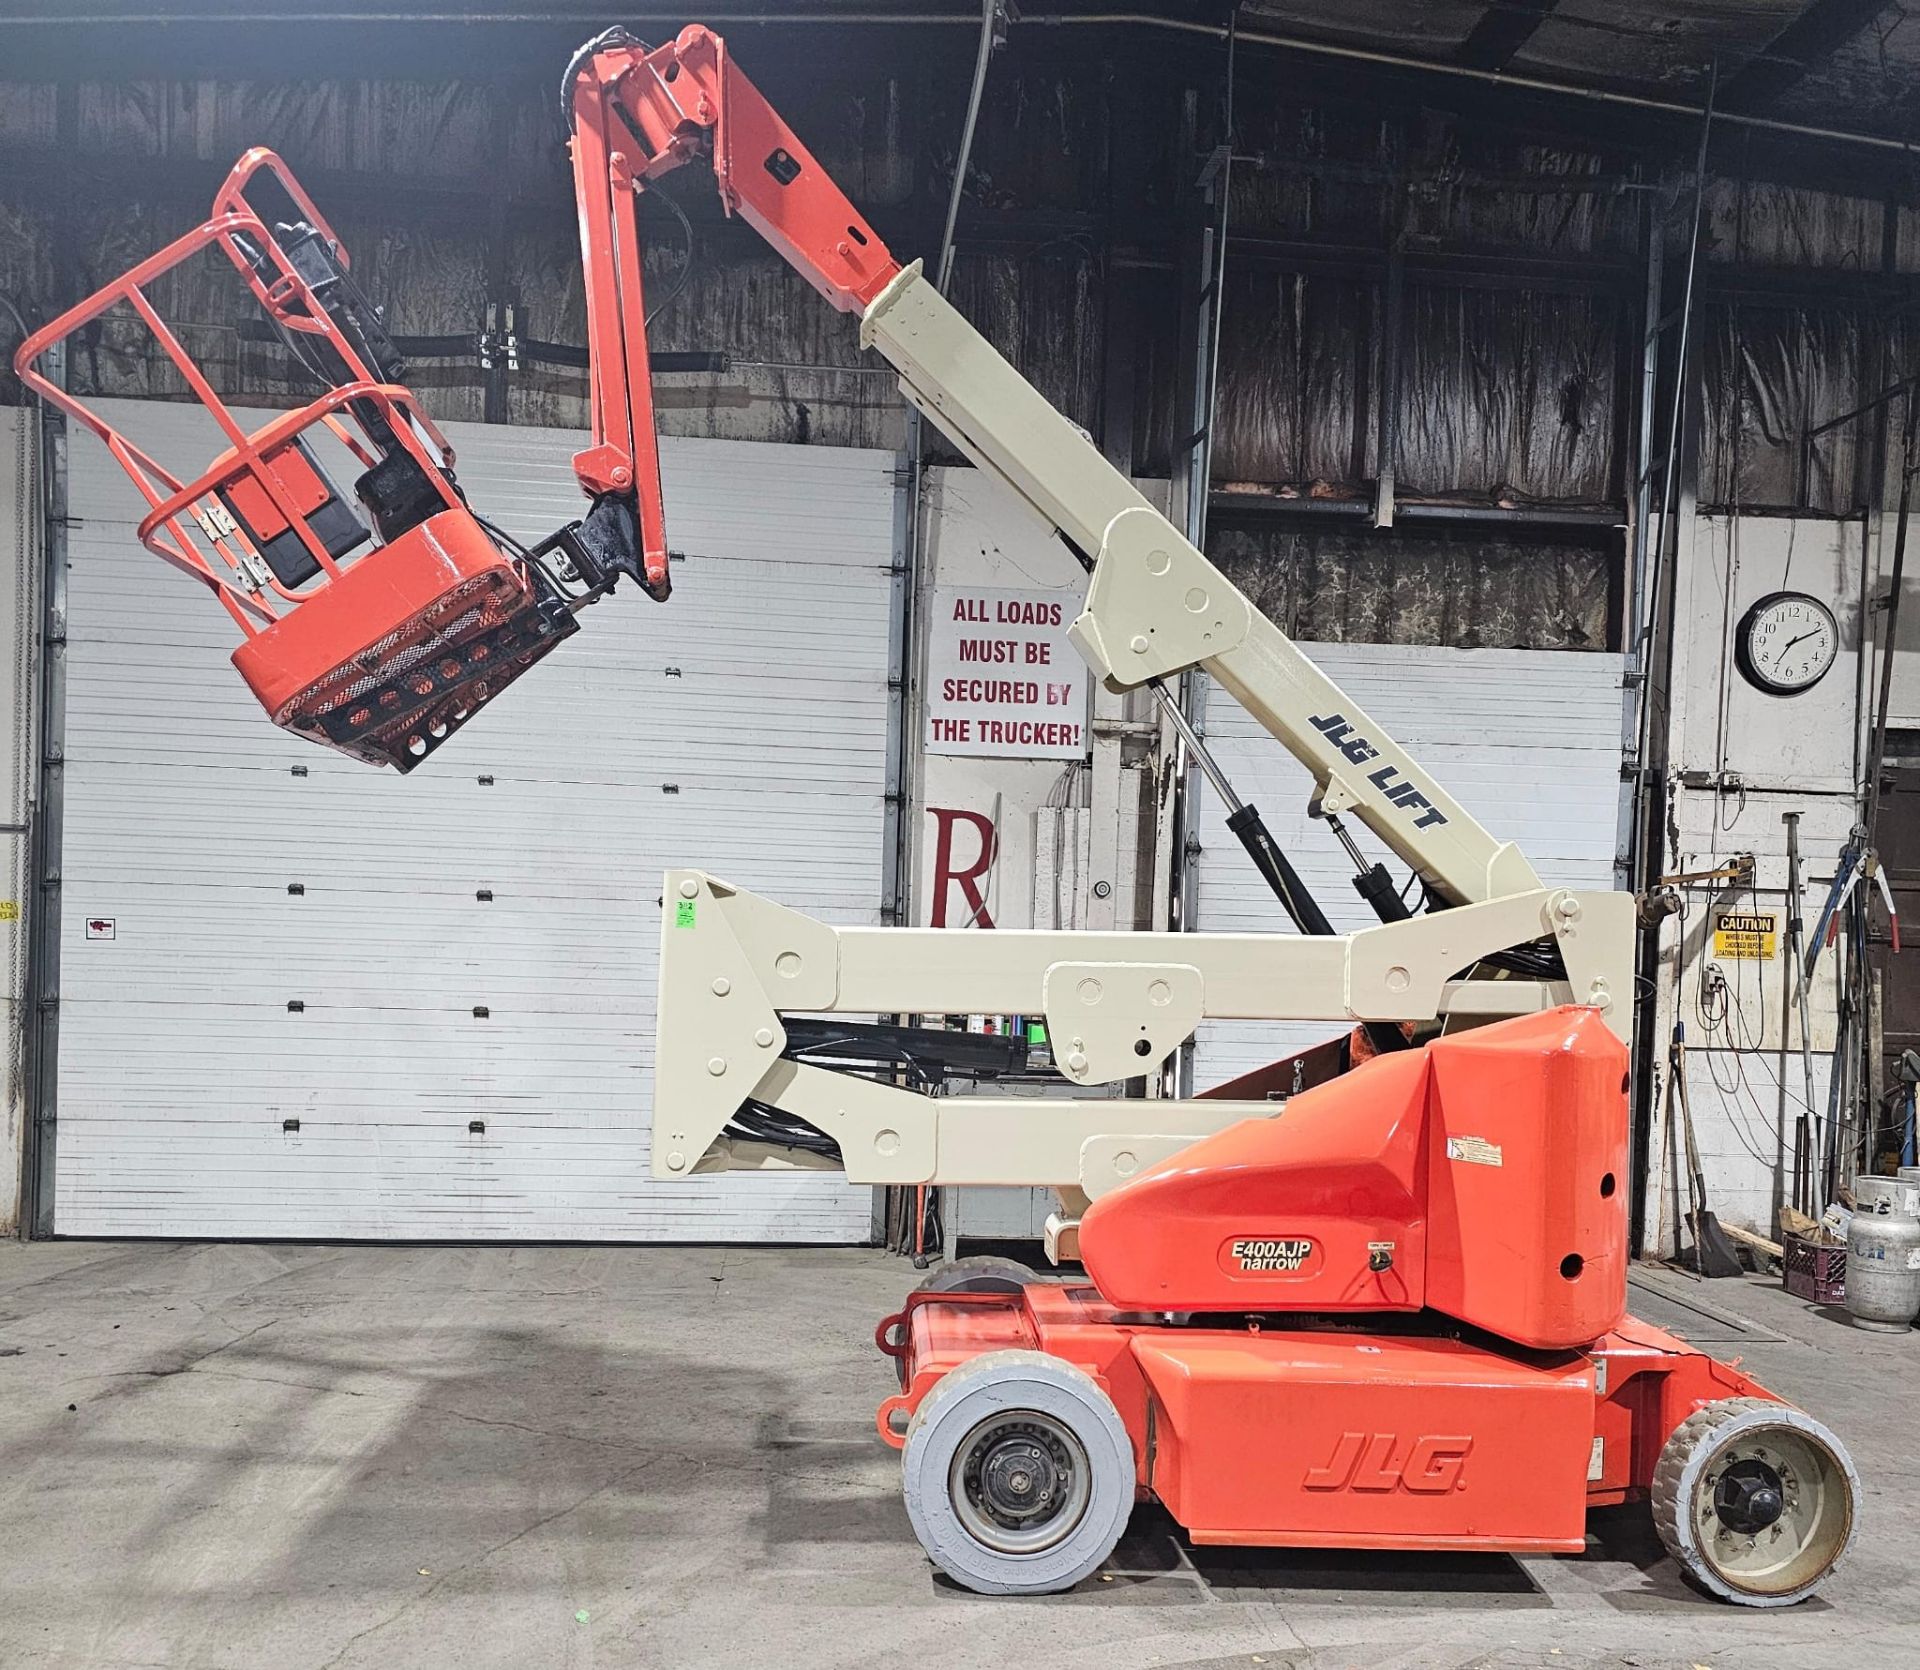 2006 JLG LIFT E400AJP Articulating Zoom Boom Lift - Narrow 500 lbs VERY LOW HOURS - 40ft lift height - Image 2 of 9